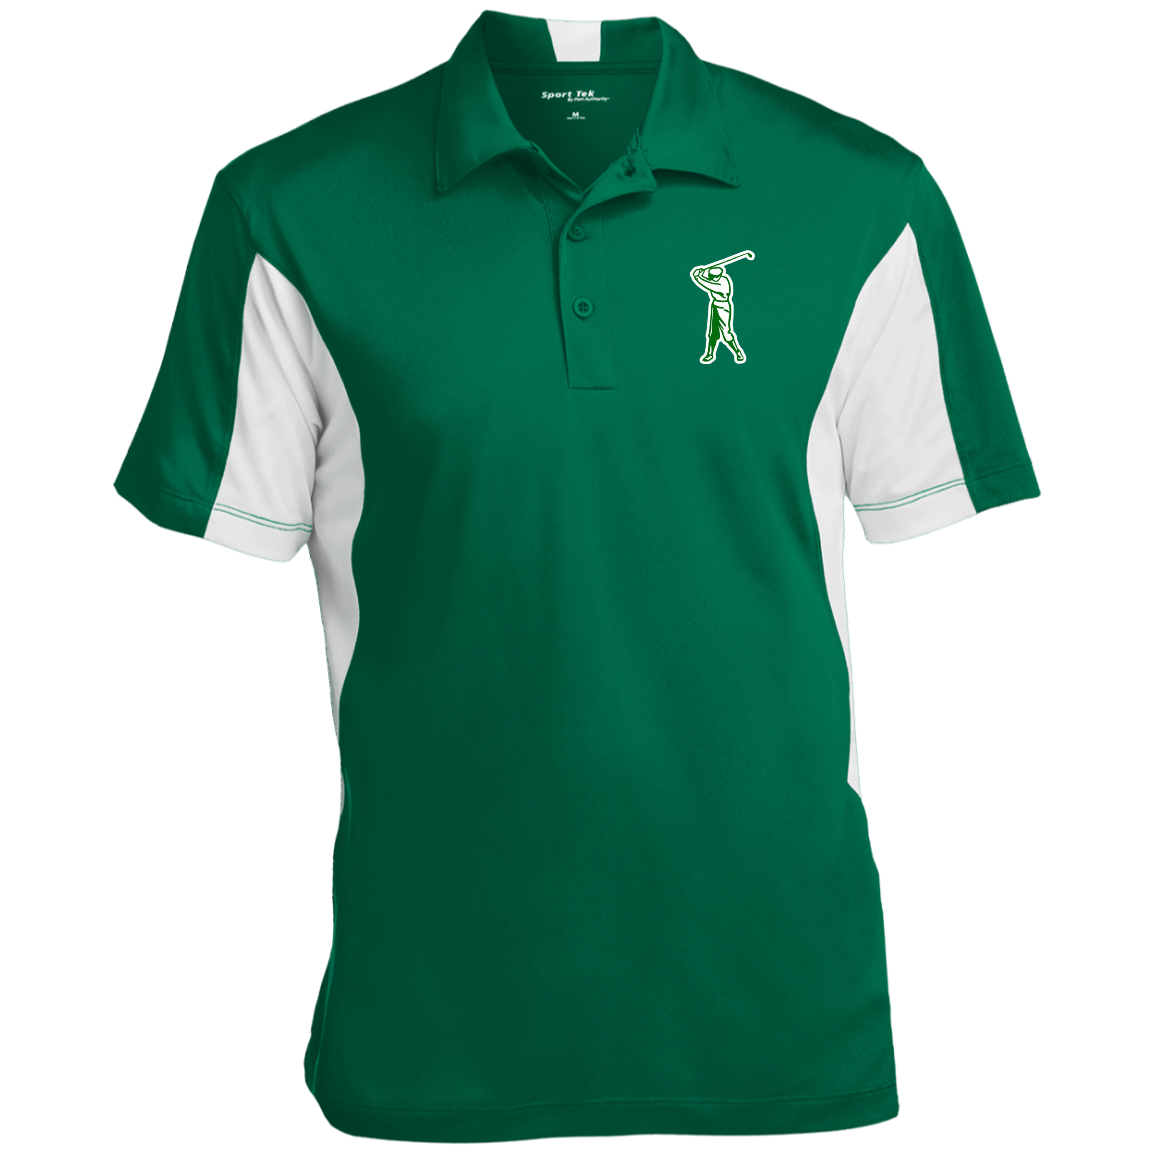 Tee Time Men's Colorblock Performance Polo